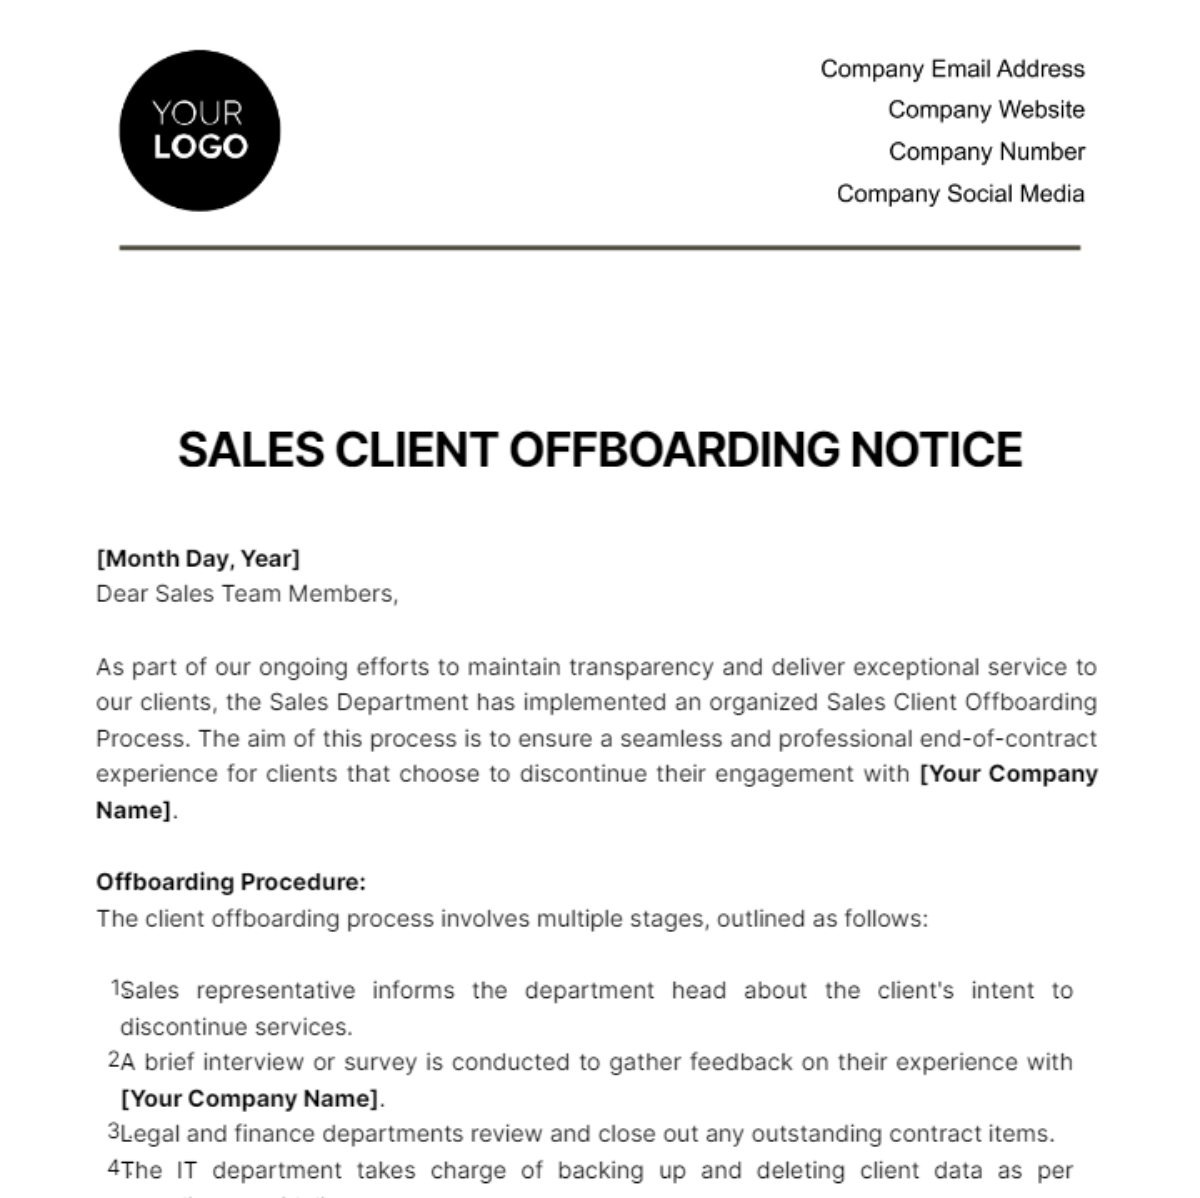 Sales Client Offboarding Notice Template